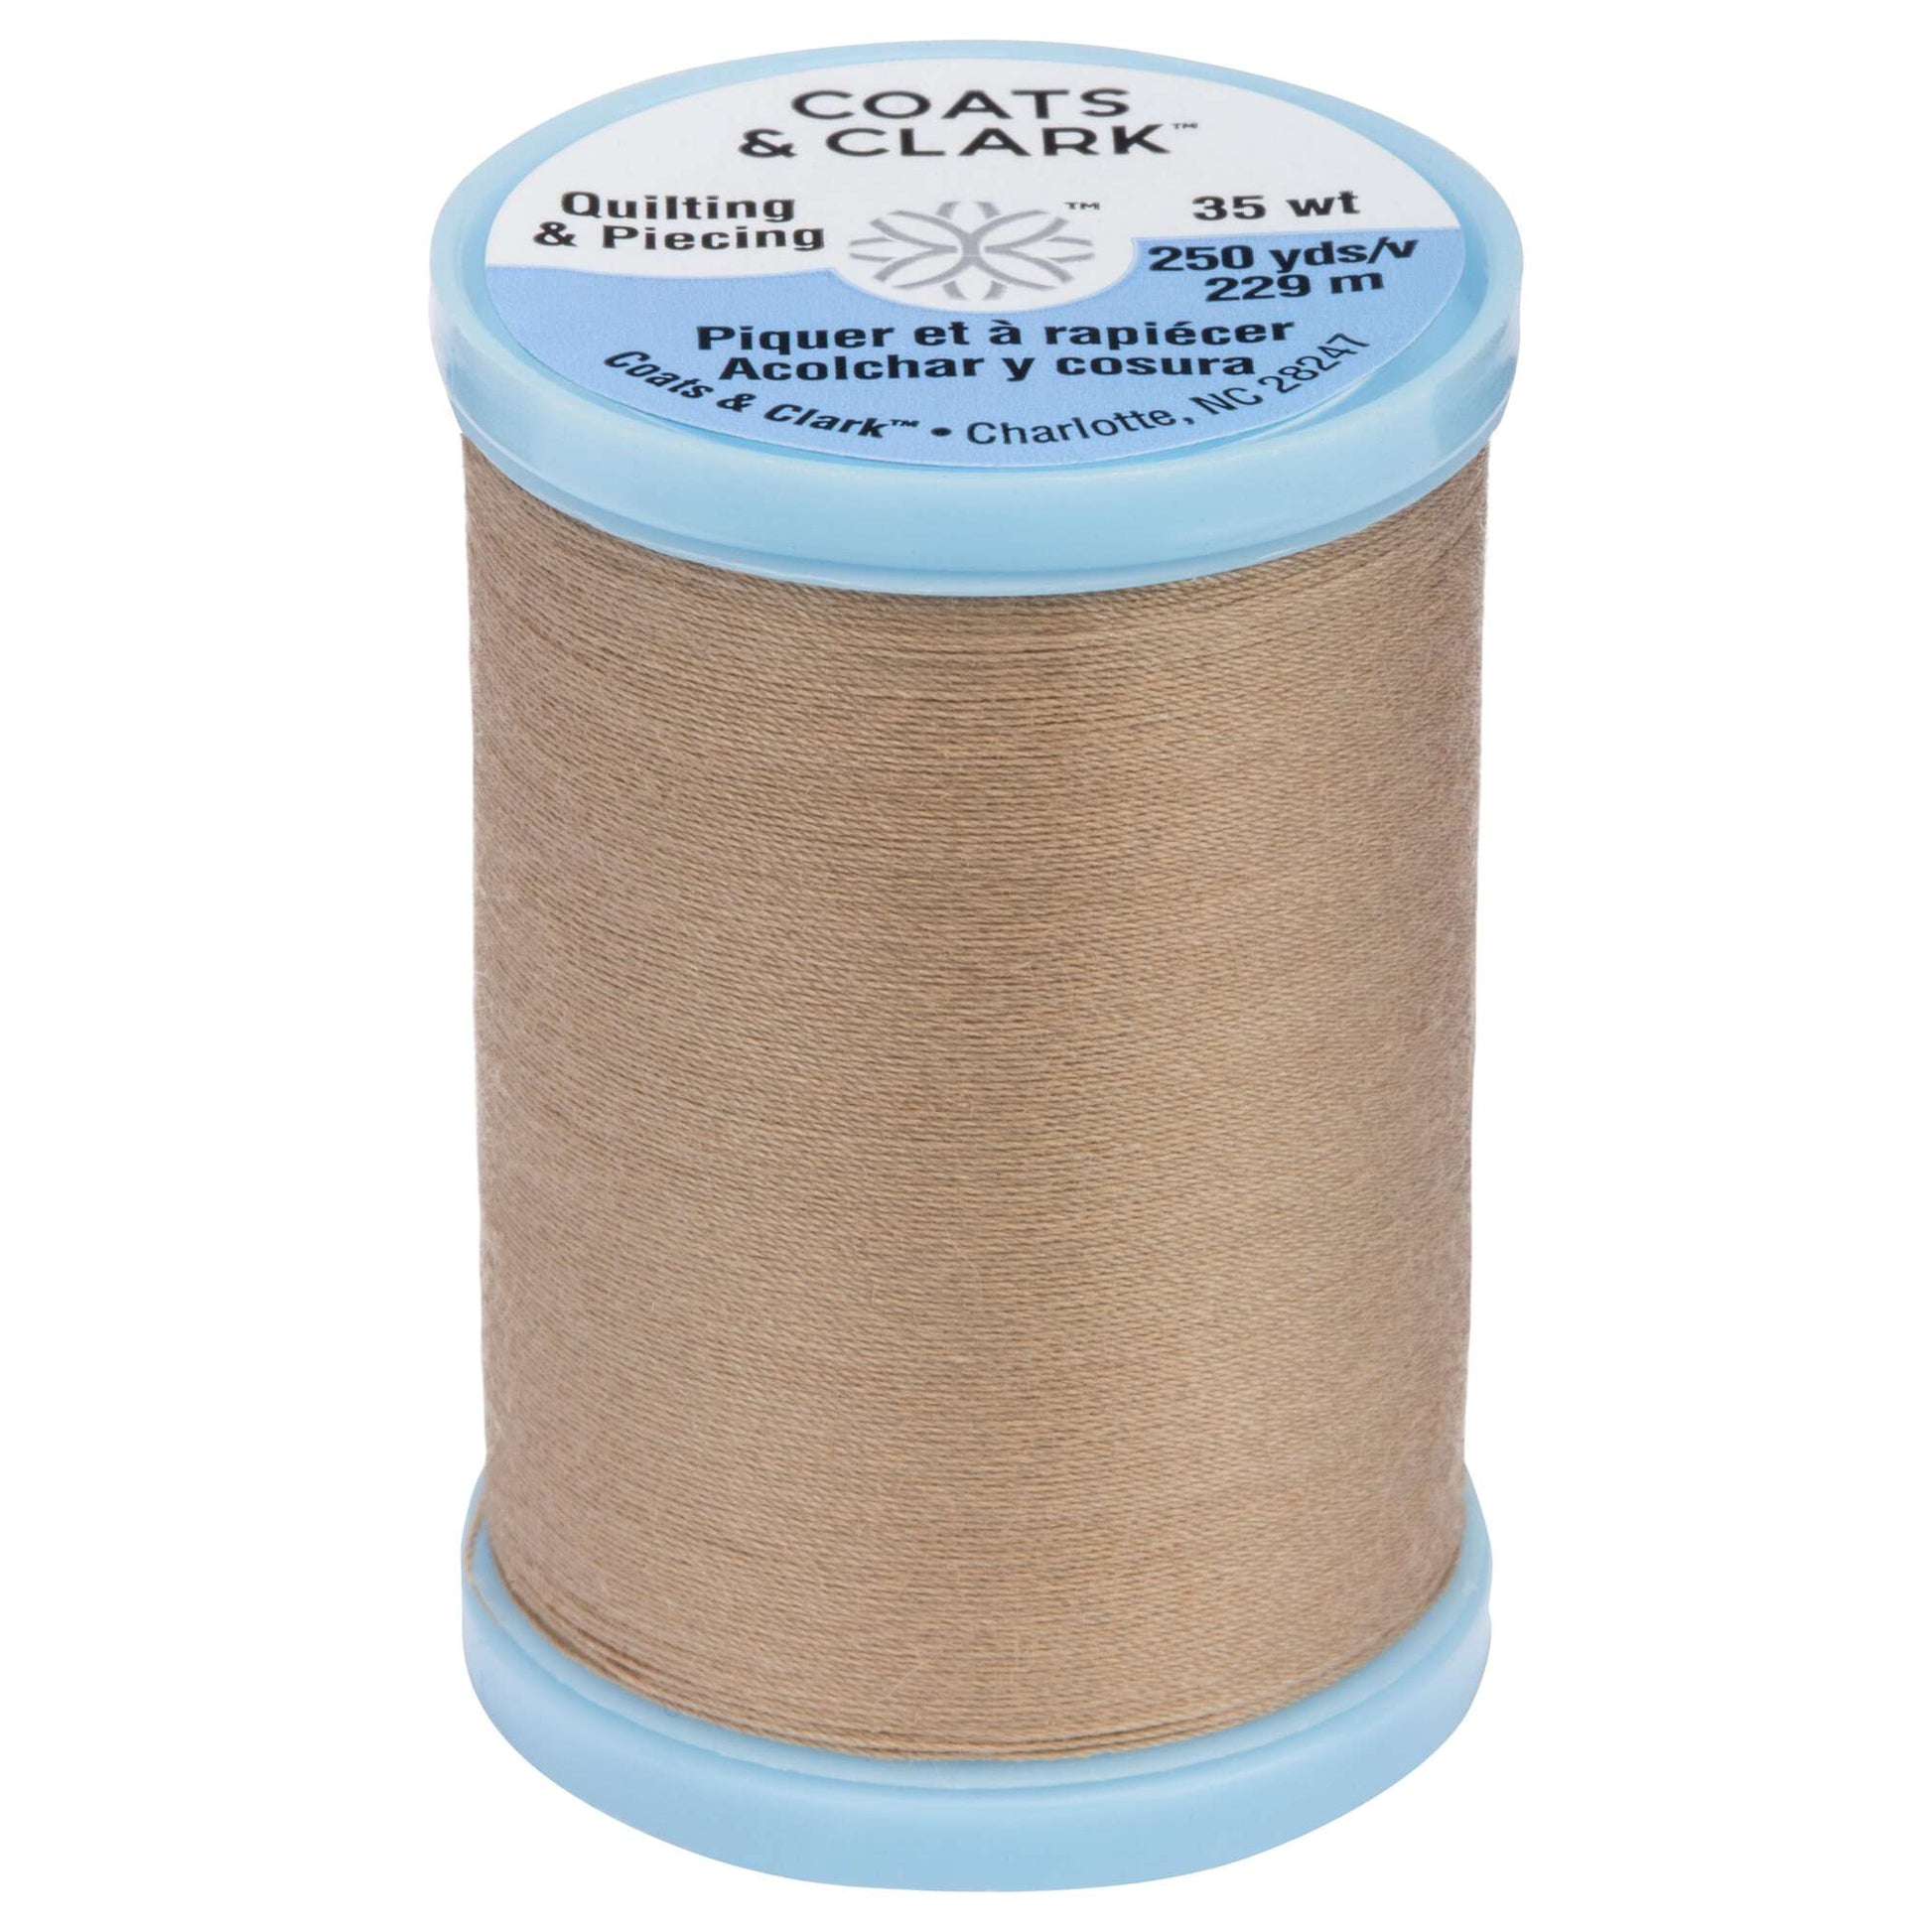 Coats & Clark Cotton Covered Quilting & Piecing Thread (250 Yards) Dogwood